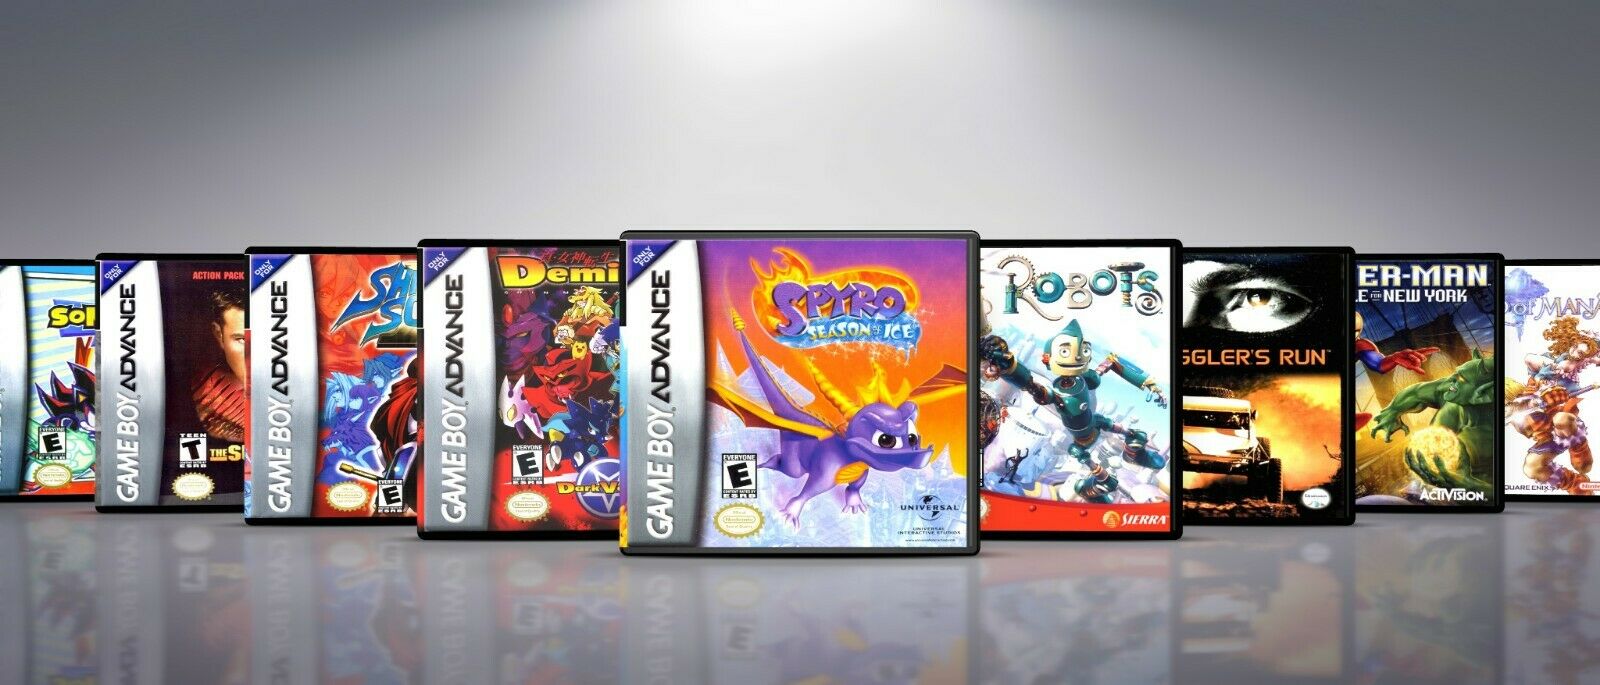 Custom Covers And Cases For Gameboy Advanced Gba: Titles Q-s. No Games!!!